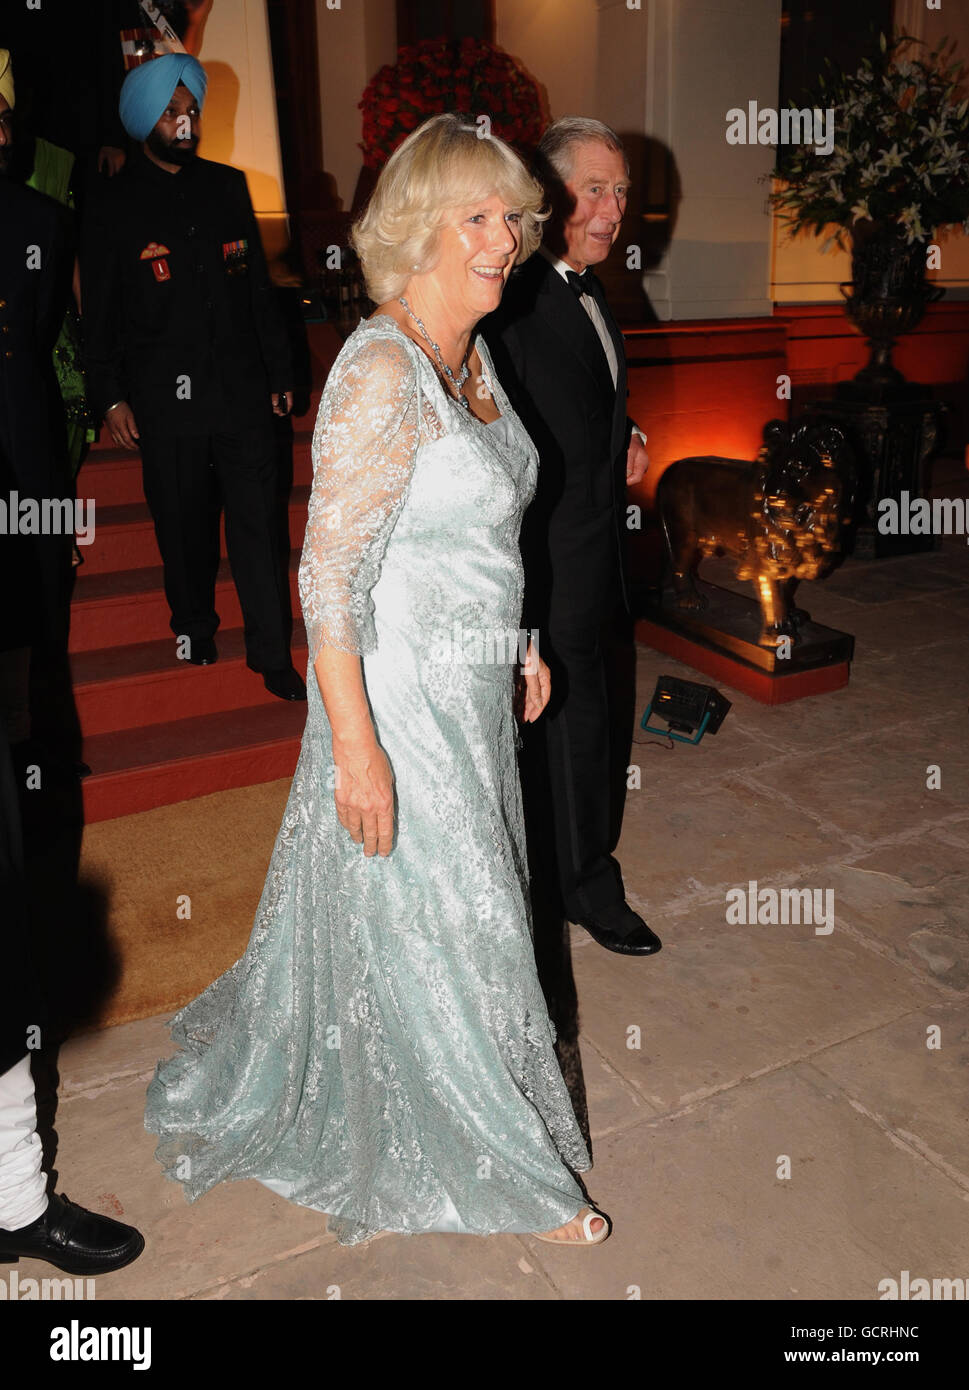 The Prince of Wales and Duchess of Cornwall arrive at the Maharaja's palace in Patialia, India to attend a banquet with Maharaja of Patiala, Captain Amarinder Singh. Stock Photo